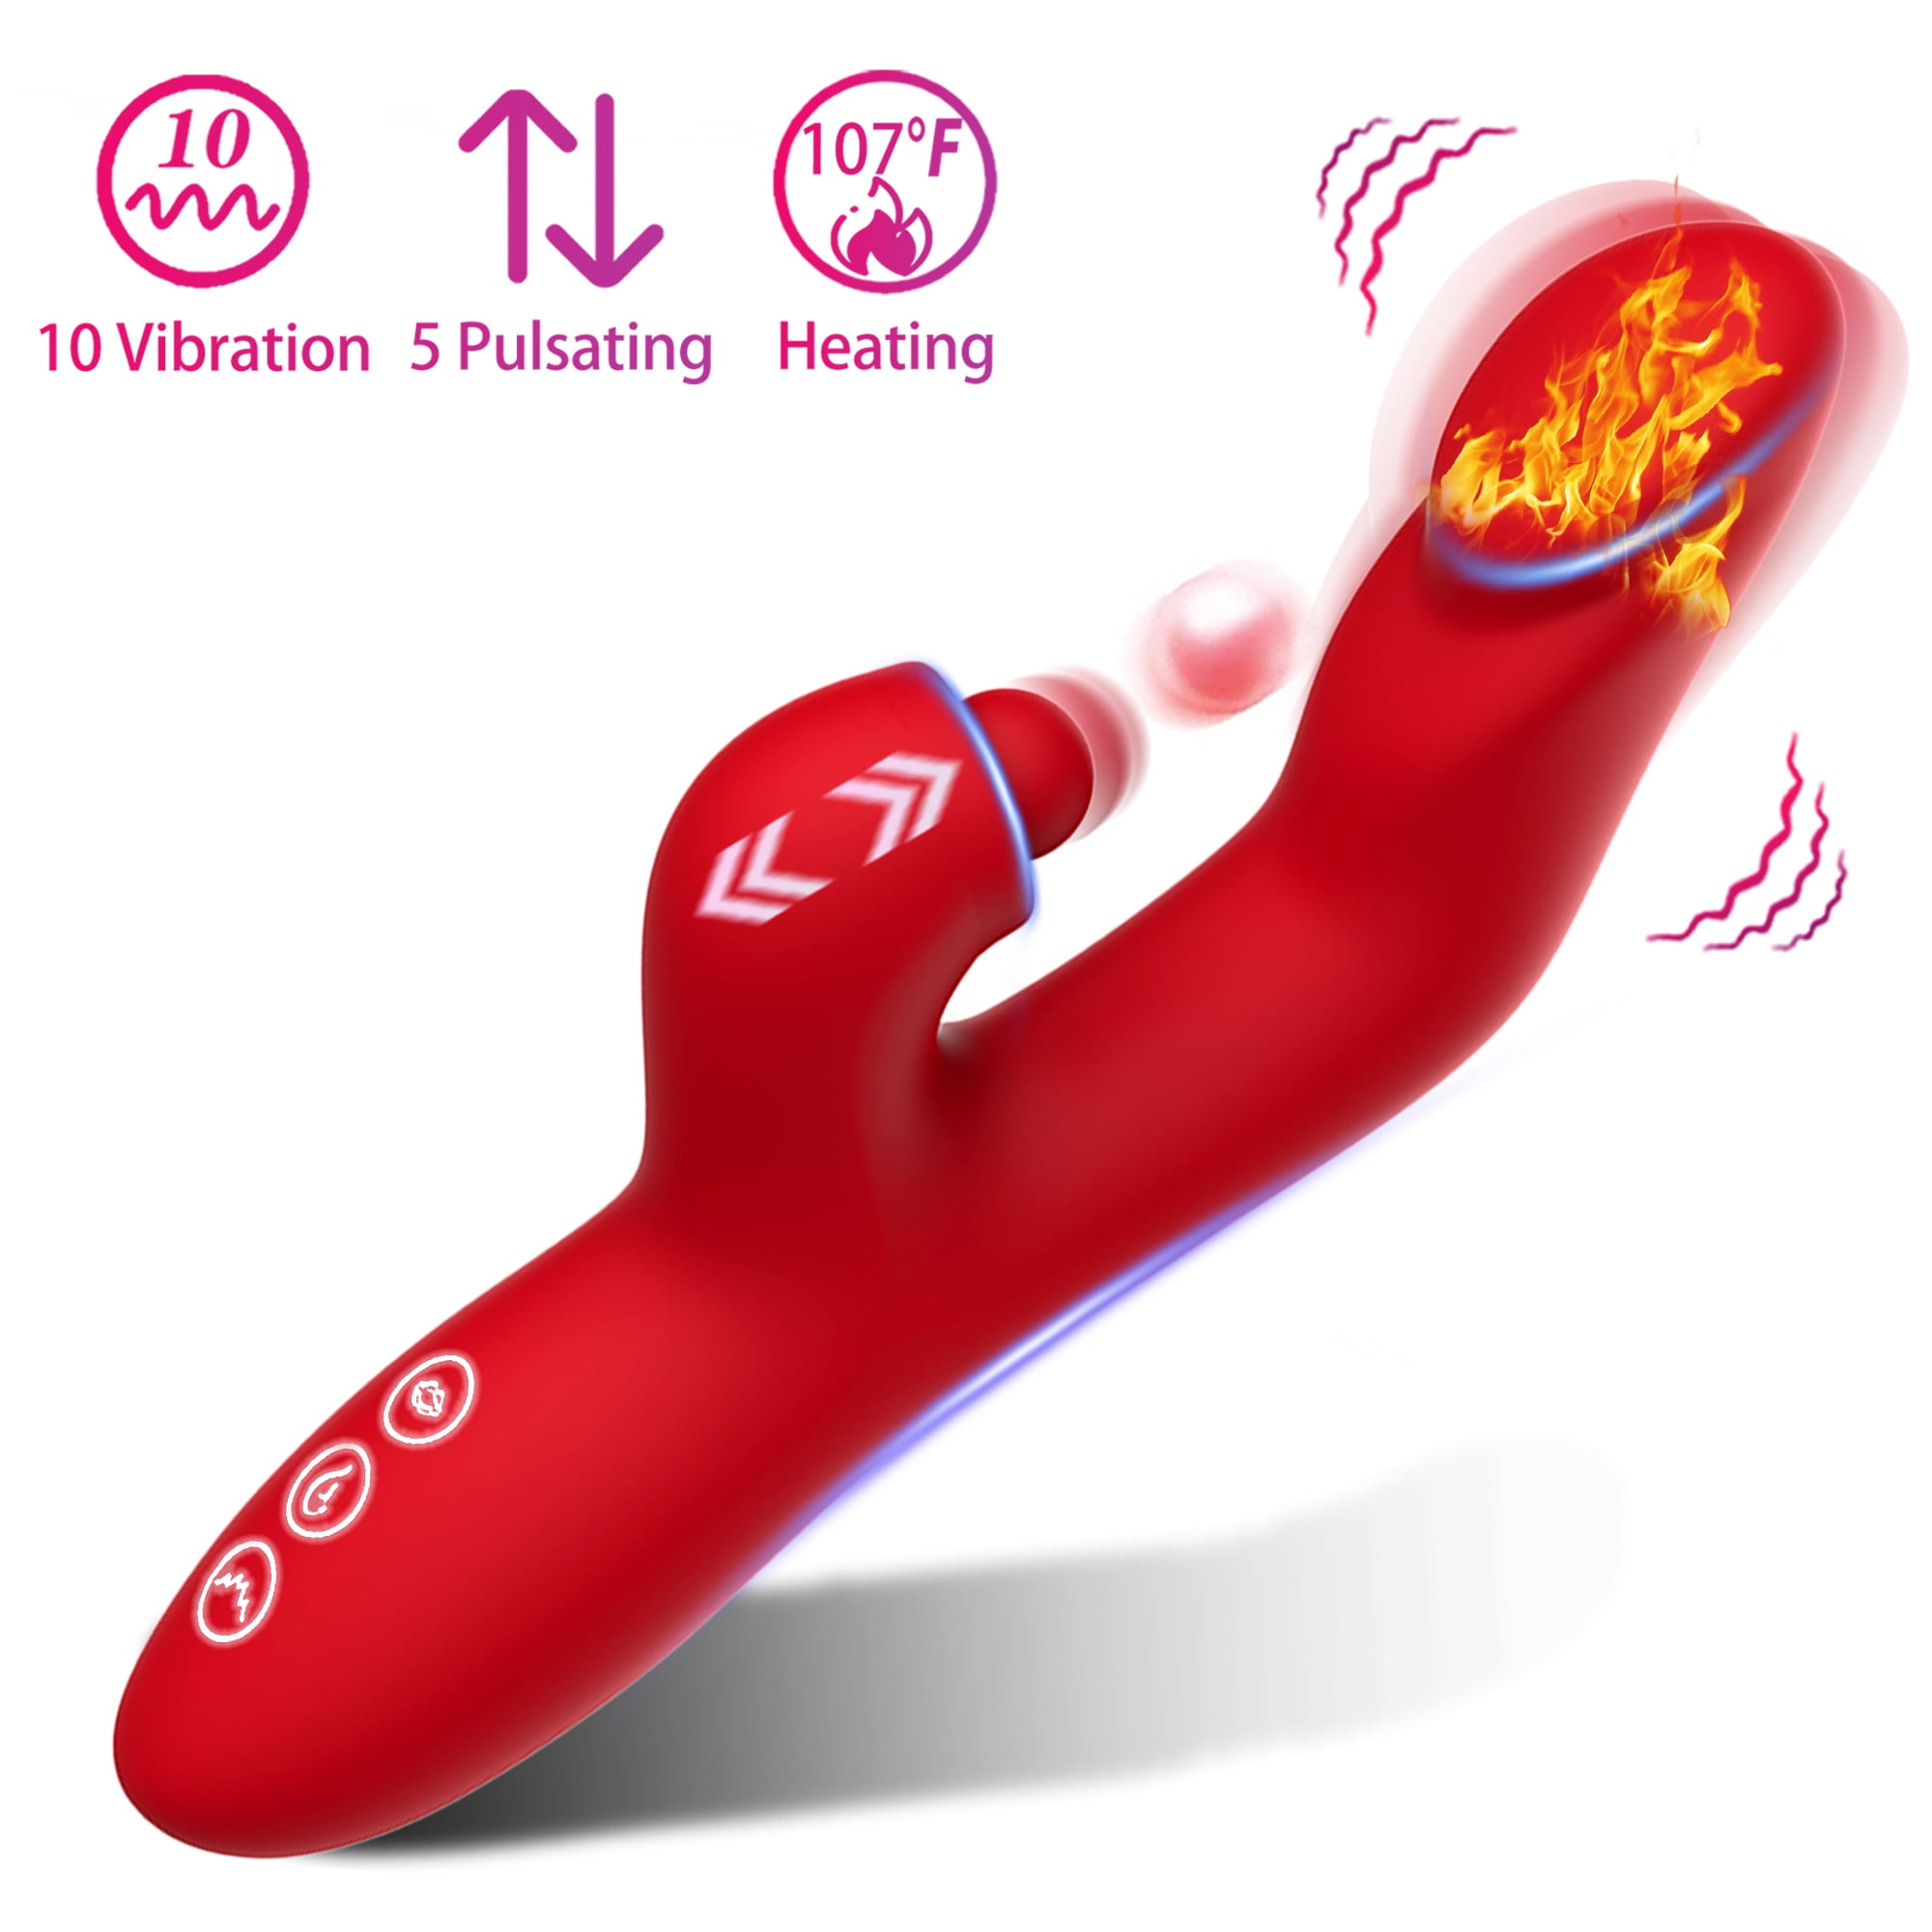 Esvow Sex Toys Thrusting Rabbit Vibrator For Women G Spot Tapping Adult Toy With 10 Vibration